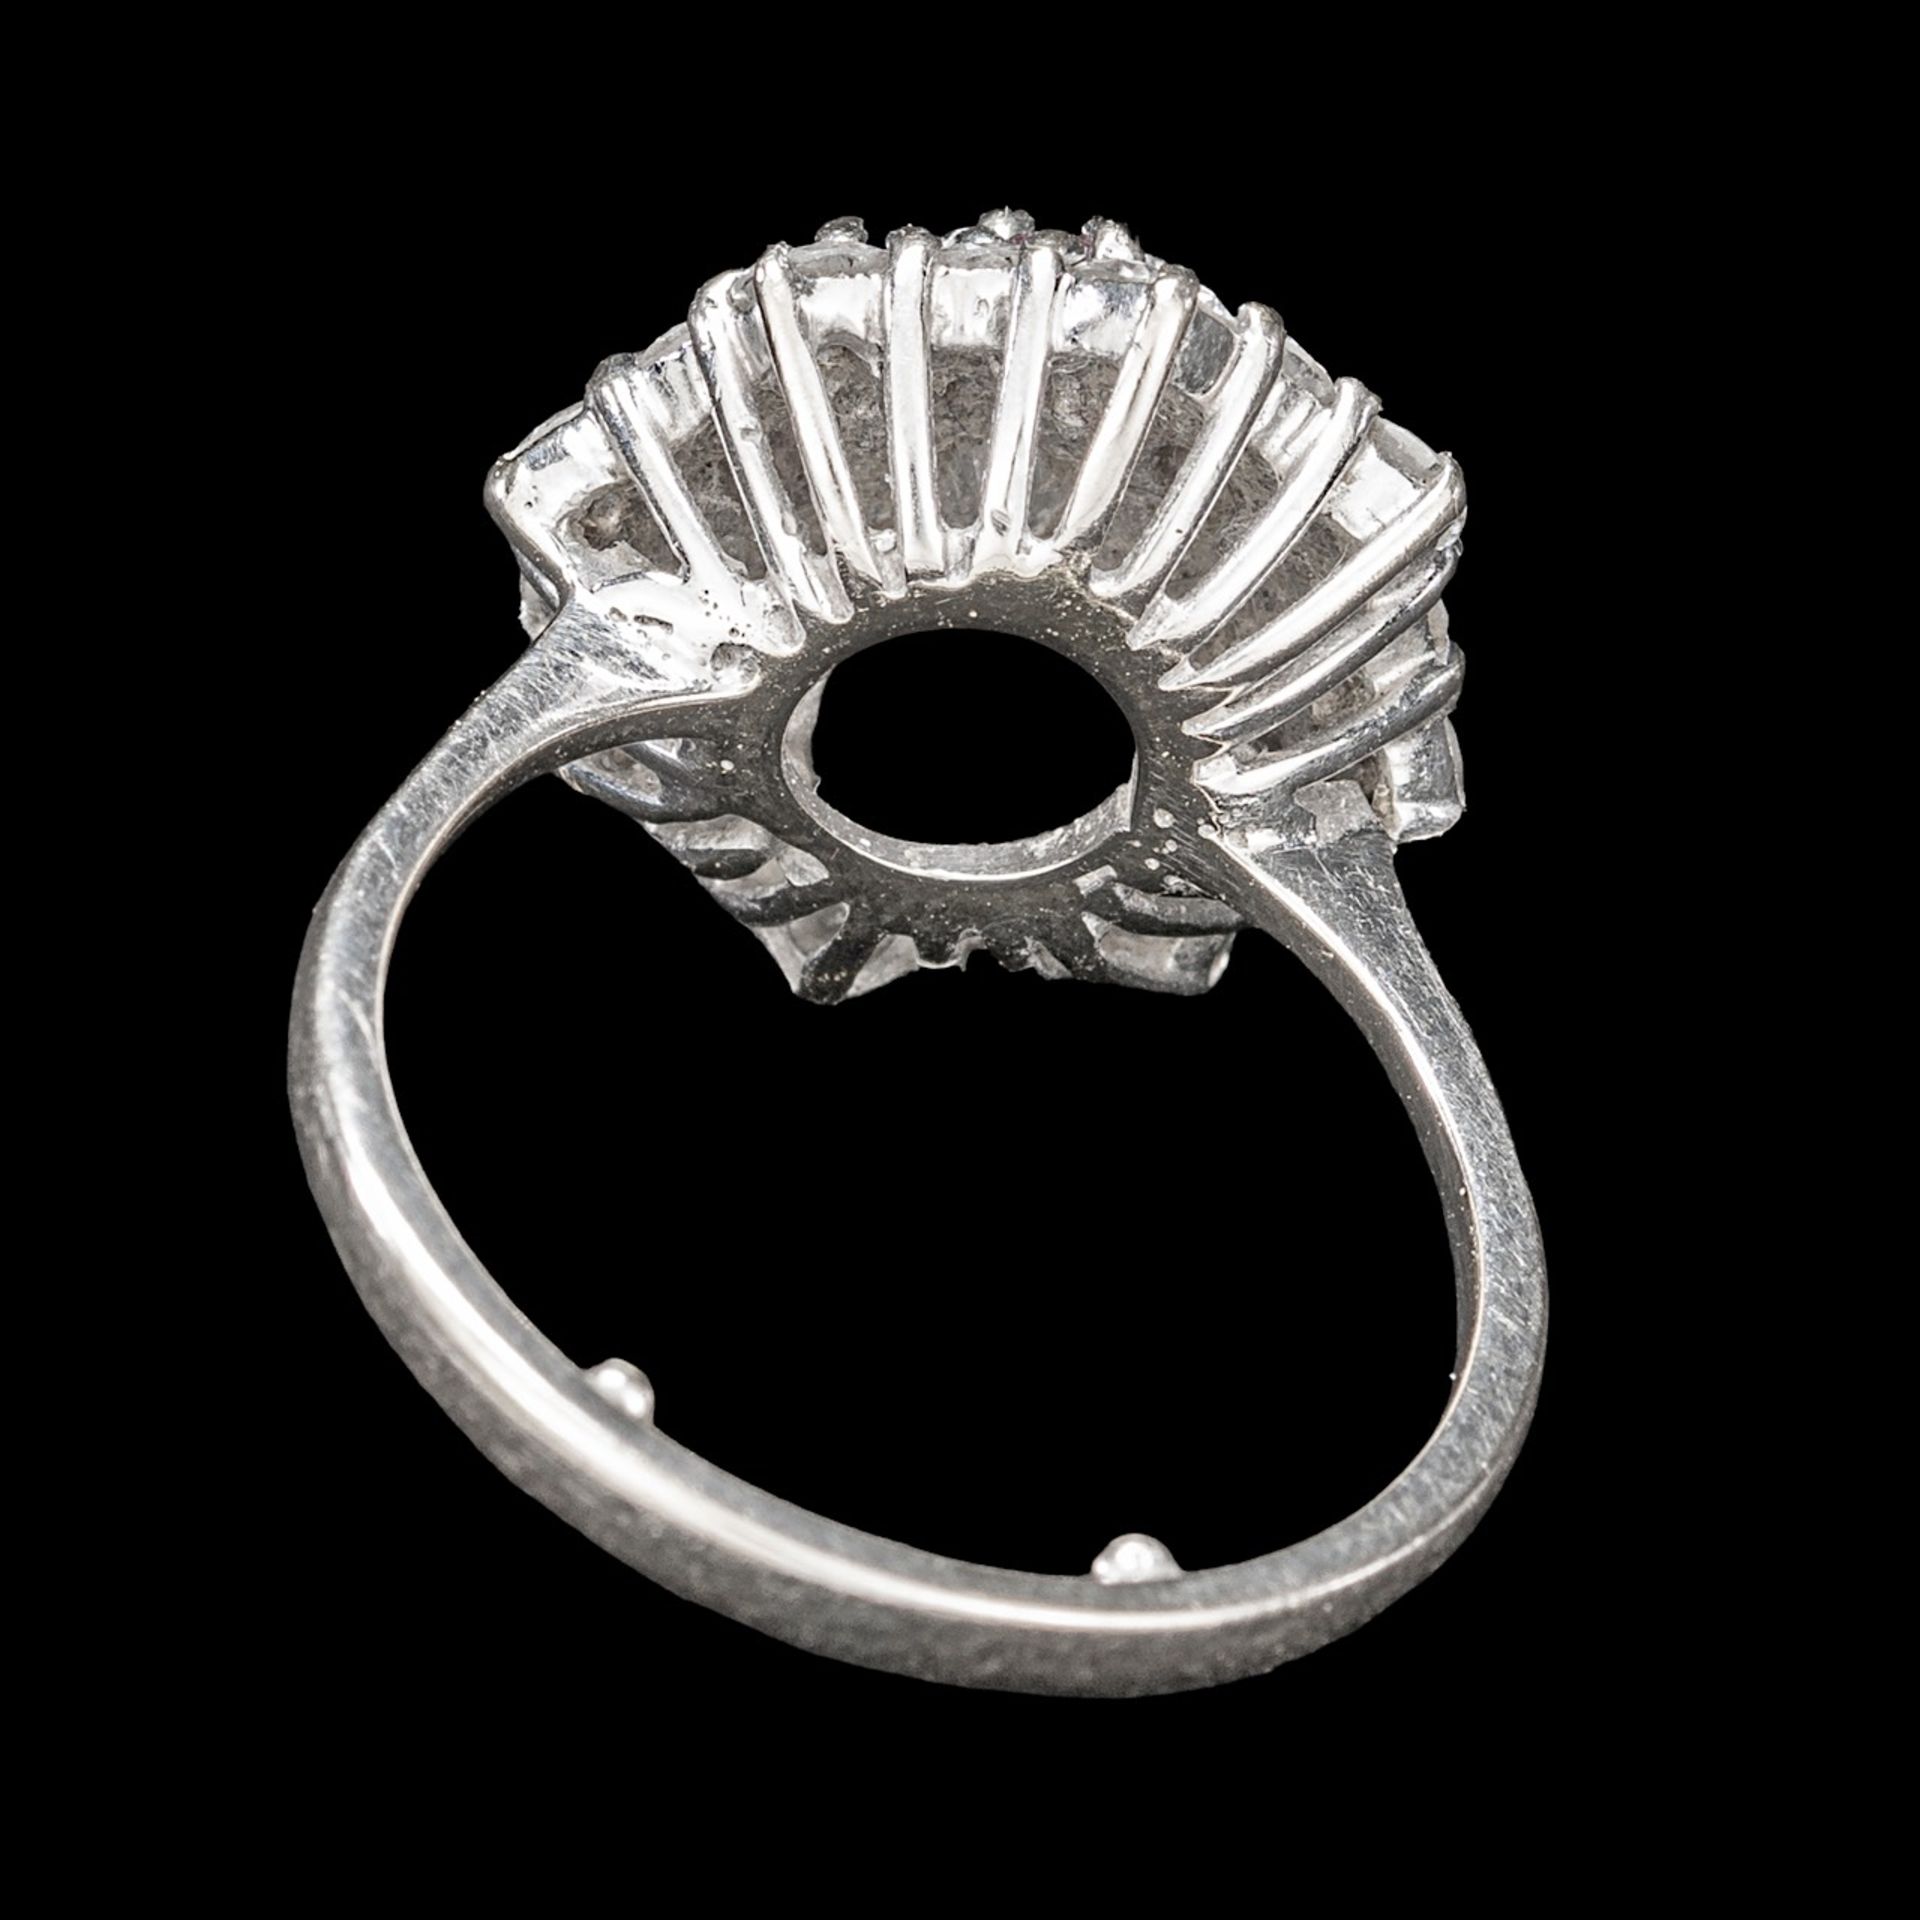 An 18ct white gold flower-shaped engagement ring, weight 5,2 g. - size 4,5 - Image 4 of 4